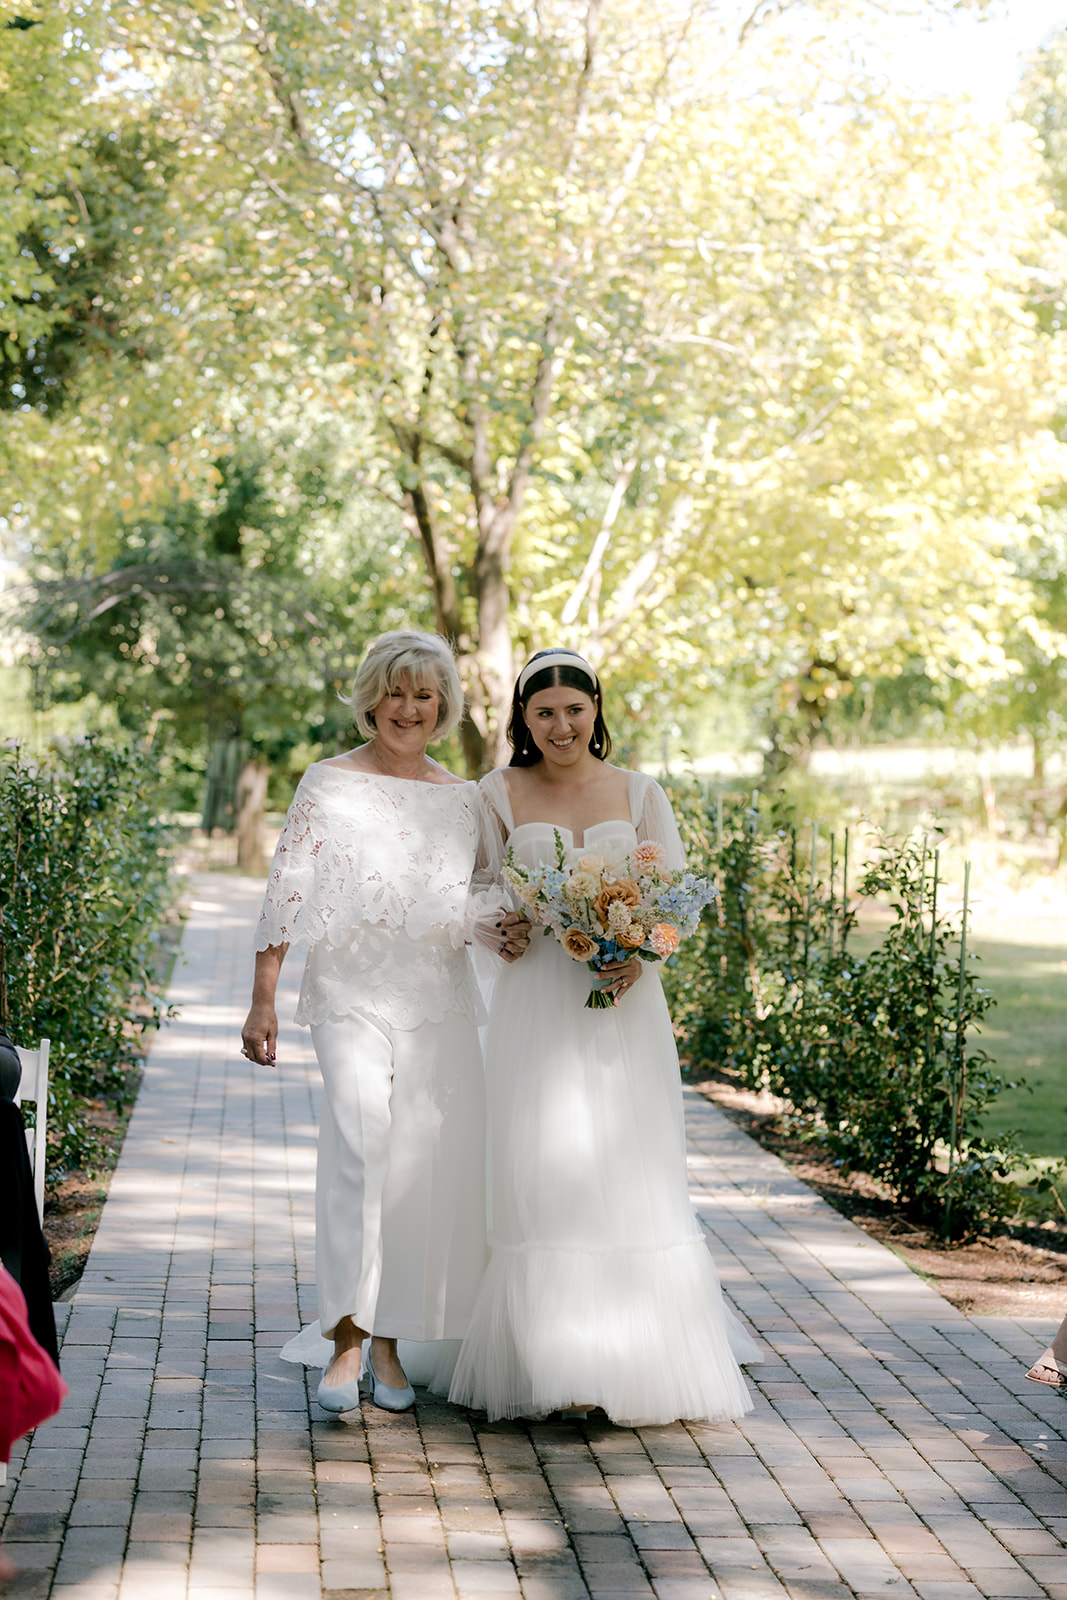 Bride & mother of the bride walking down the aisle at her elegant country wedding.